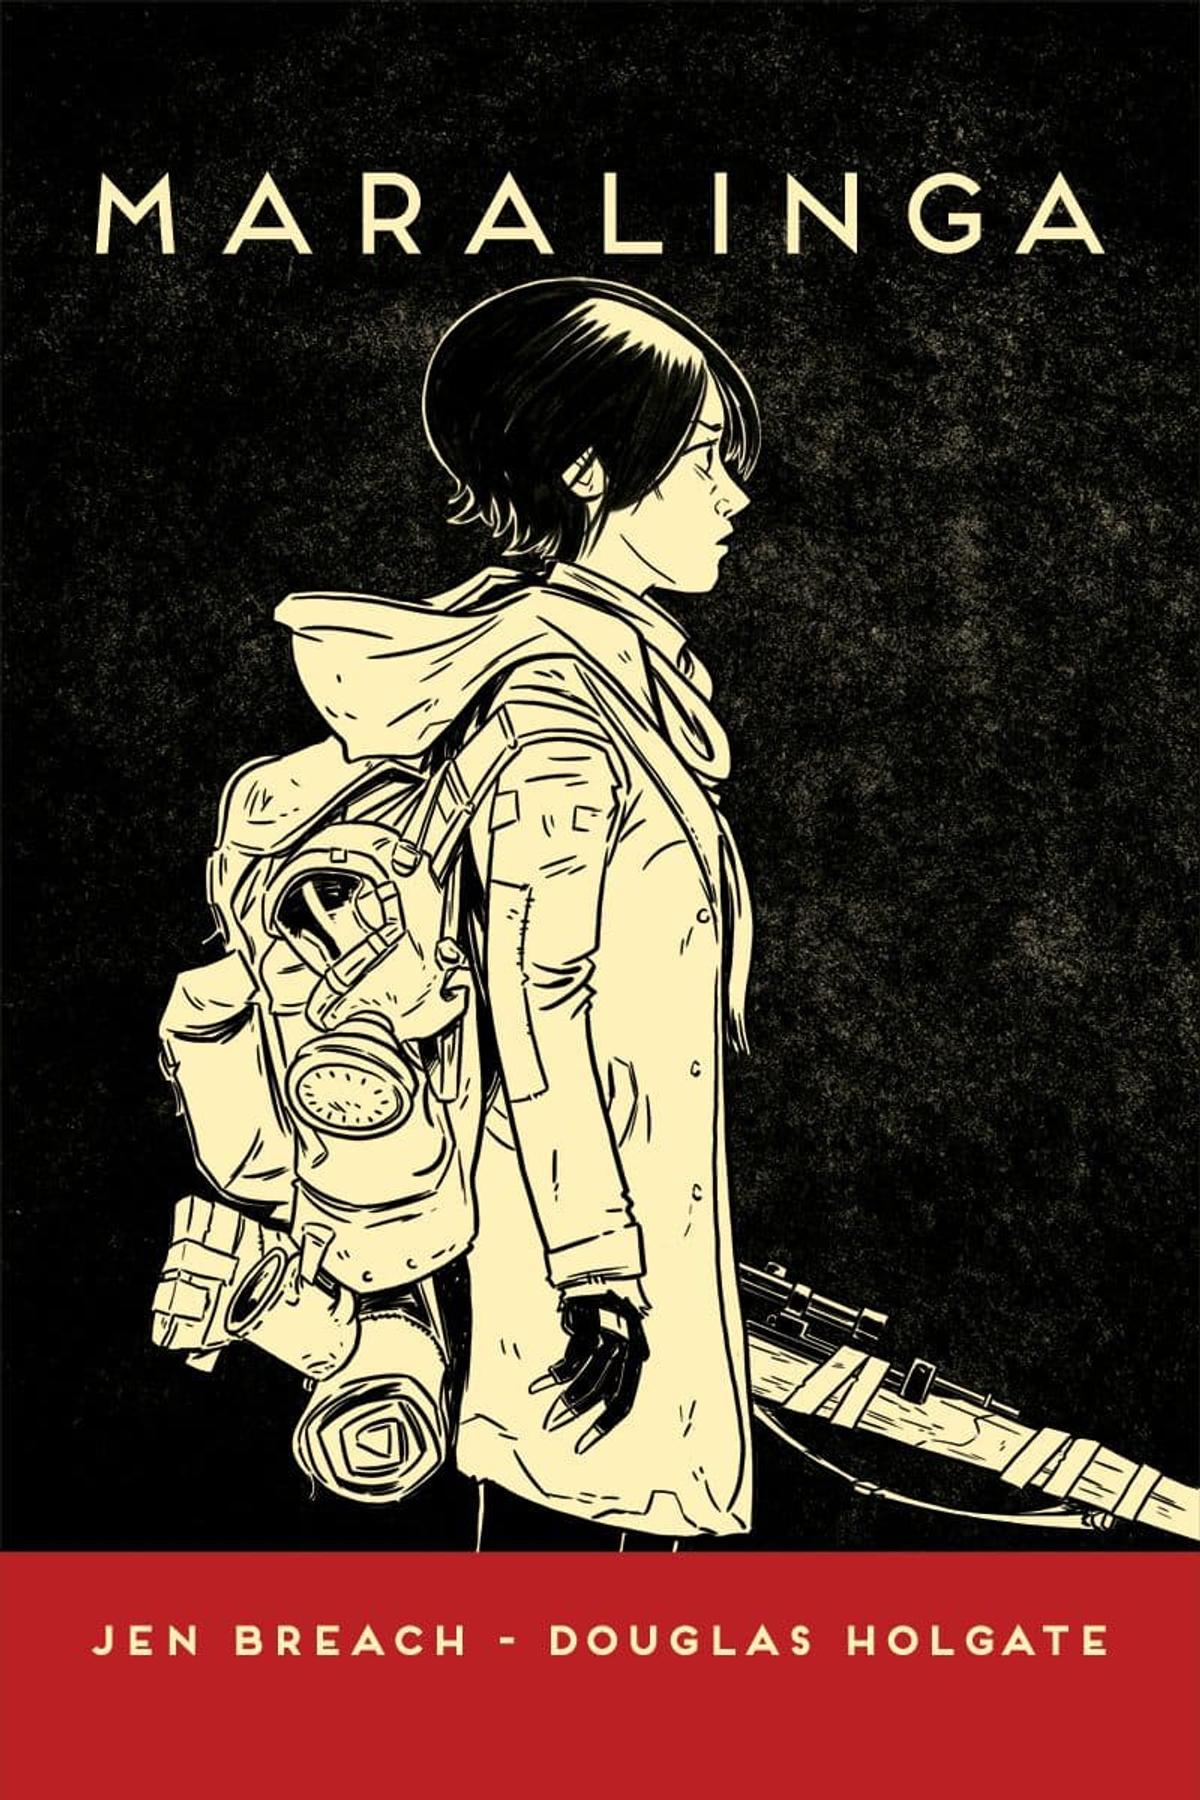 Cover illustration from Maralinga, Book 1 shows a young girl in profile carrying a rifle and wearing a backpack of camping gear - Image credit Cover illustration by Douglas Holgate